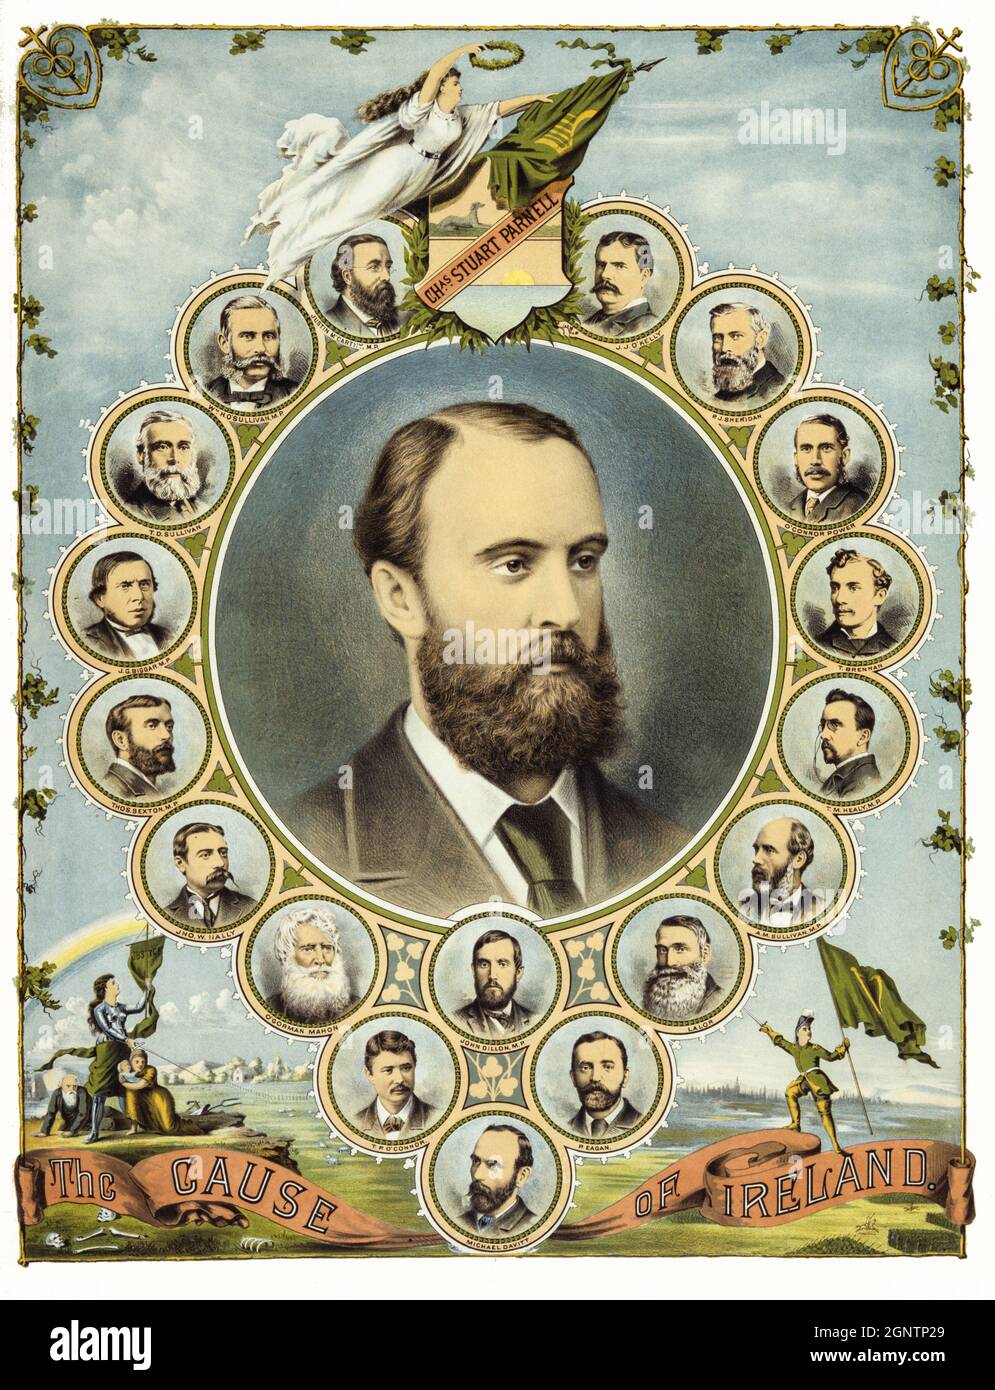 'The Cause of Ireland'. An illustration of Charles Stewart Parnell (1846-1891), was an Irish nationalist politician who served as a Member of Parliament (MP) from 1875 to 1891 and Leader of the Home Rule League from 1880 to 1882. Then from 1882 to 1891, he became Leader of the Irish Parliamentary Party, members of which circle his portrait. His party held the balance of power in the House of Commons during the Home Rule debates of 1885–1886. Stock Photo